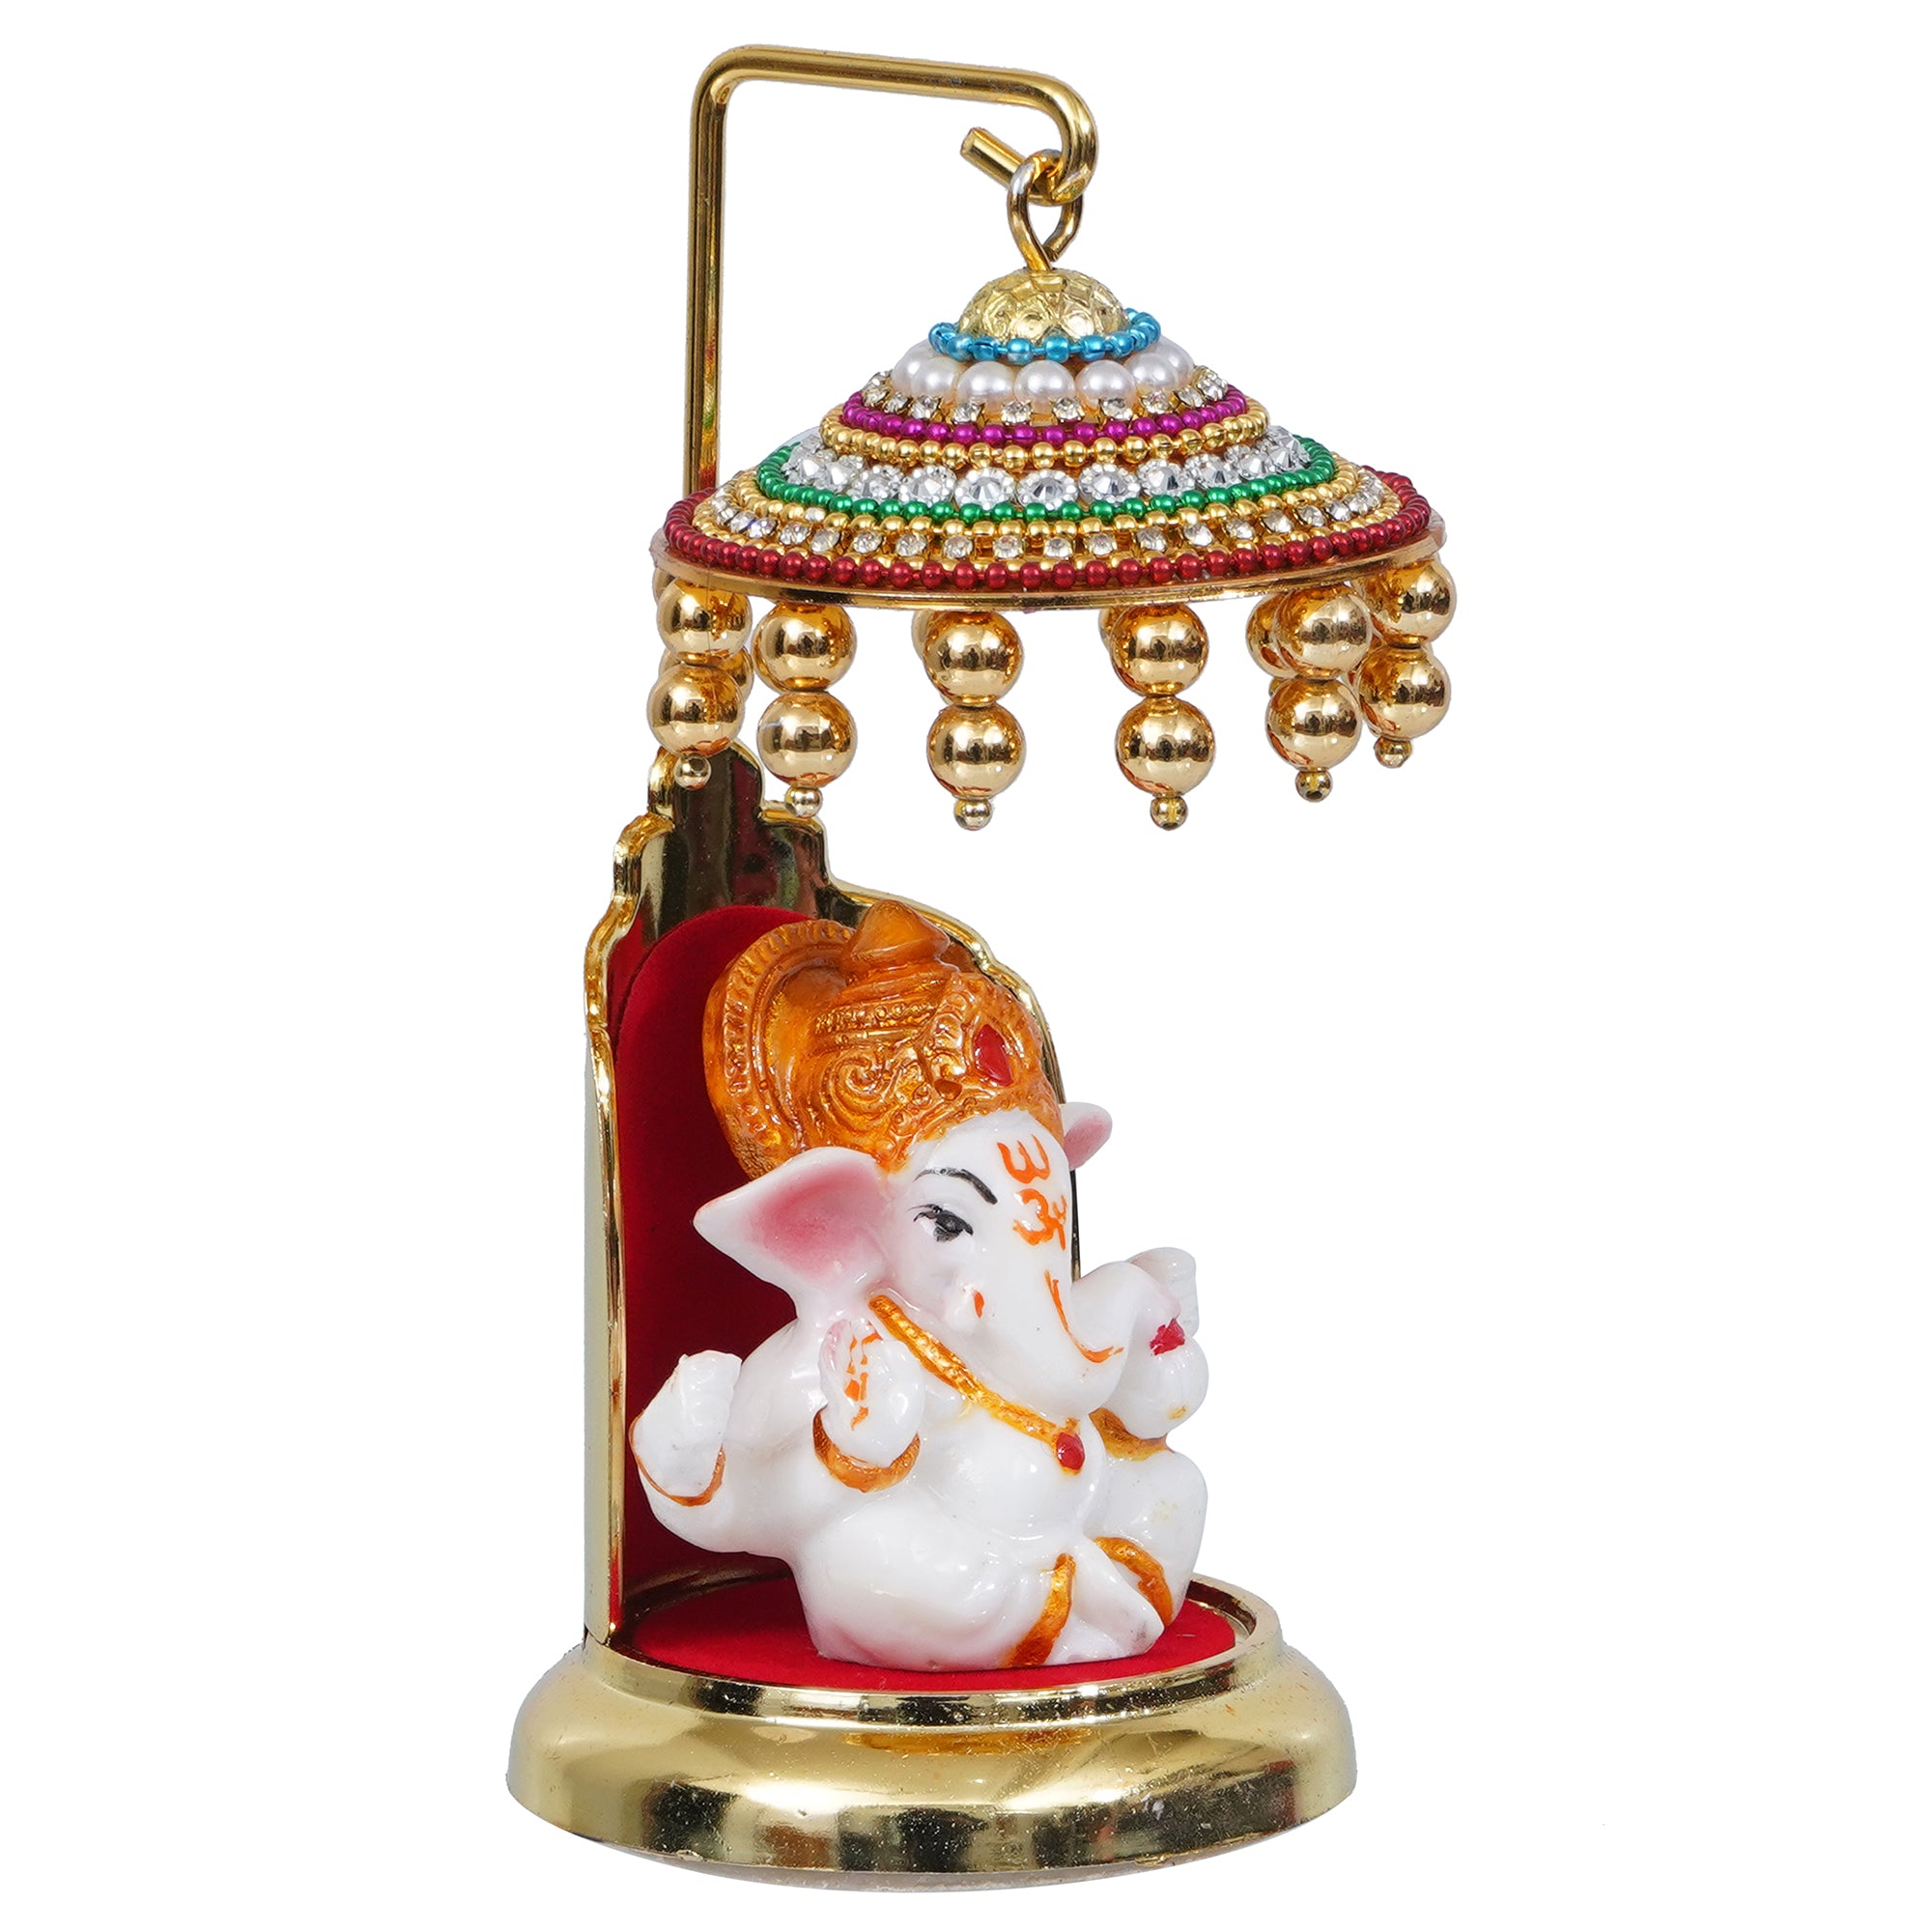 Decorative Lord Ganesha Idol with Designer Chatri for Car Dashboard, Home Temple and Office Desks 4